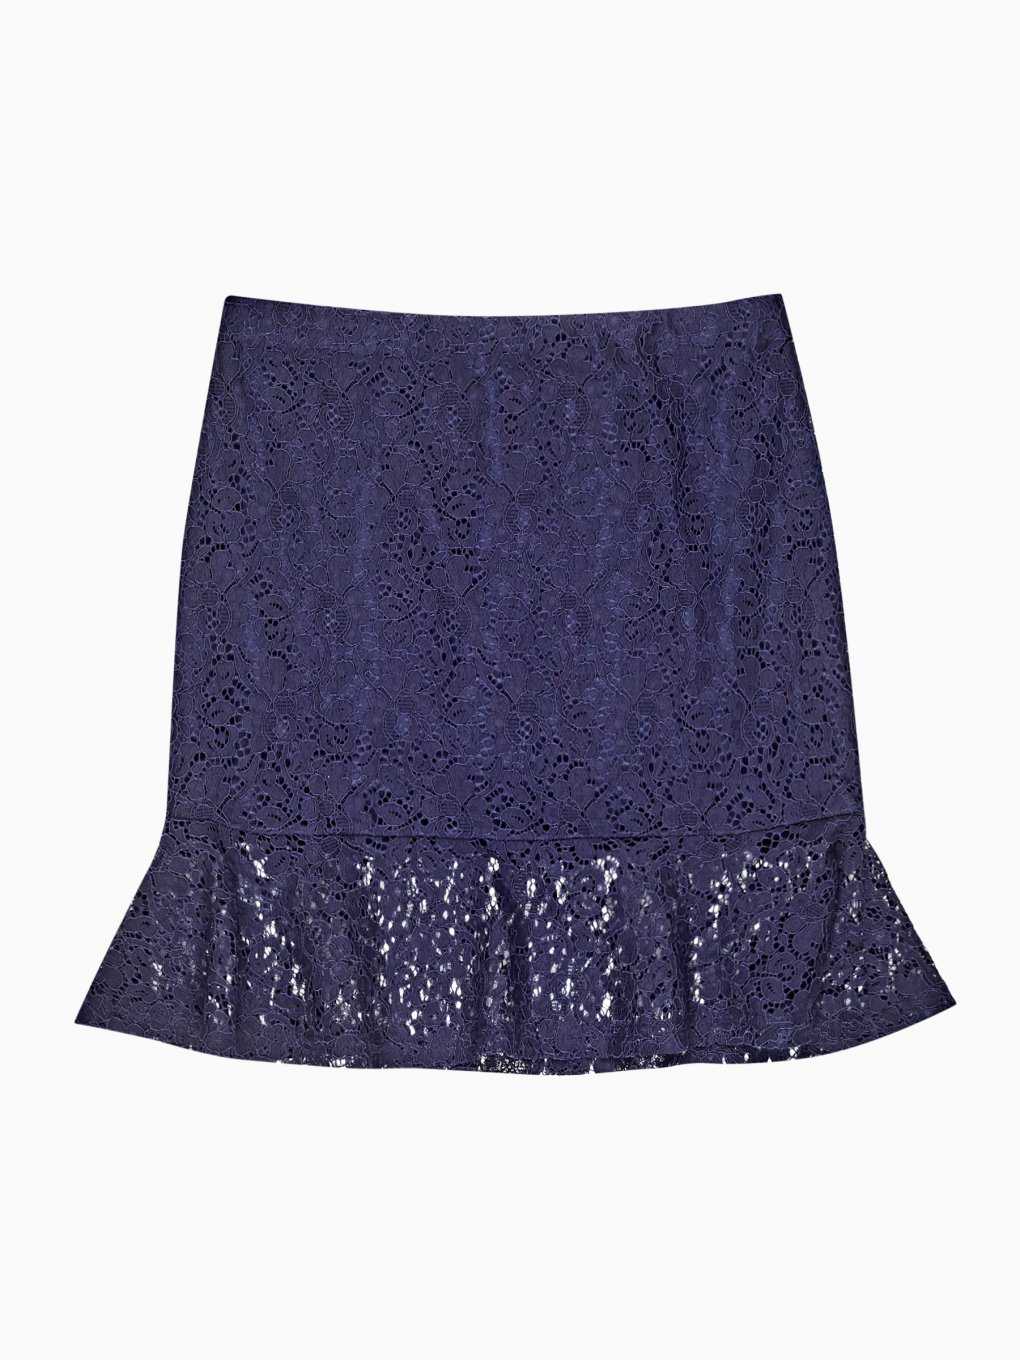 Lace skirt with ruffle on hem